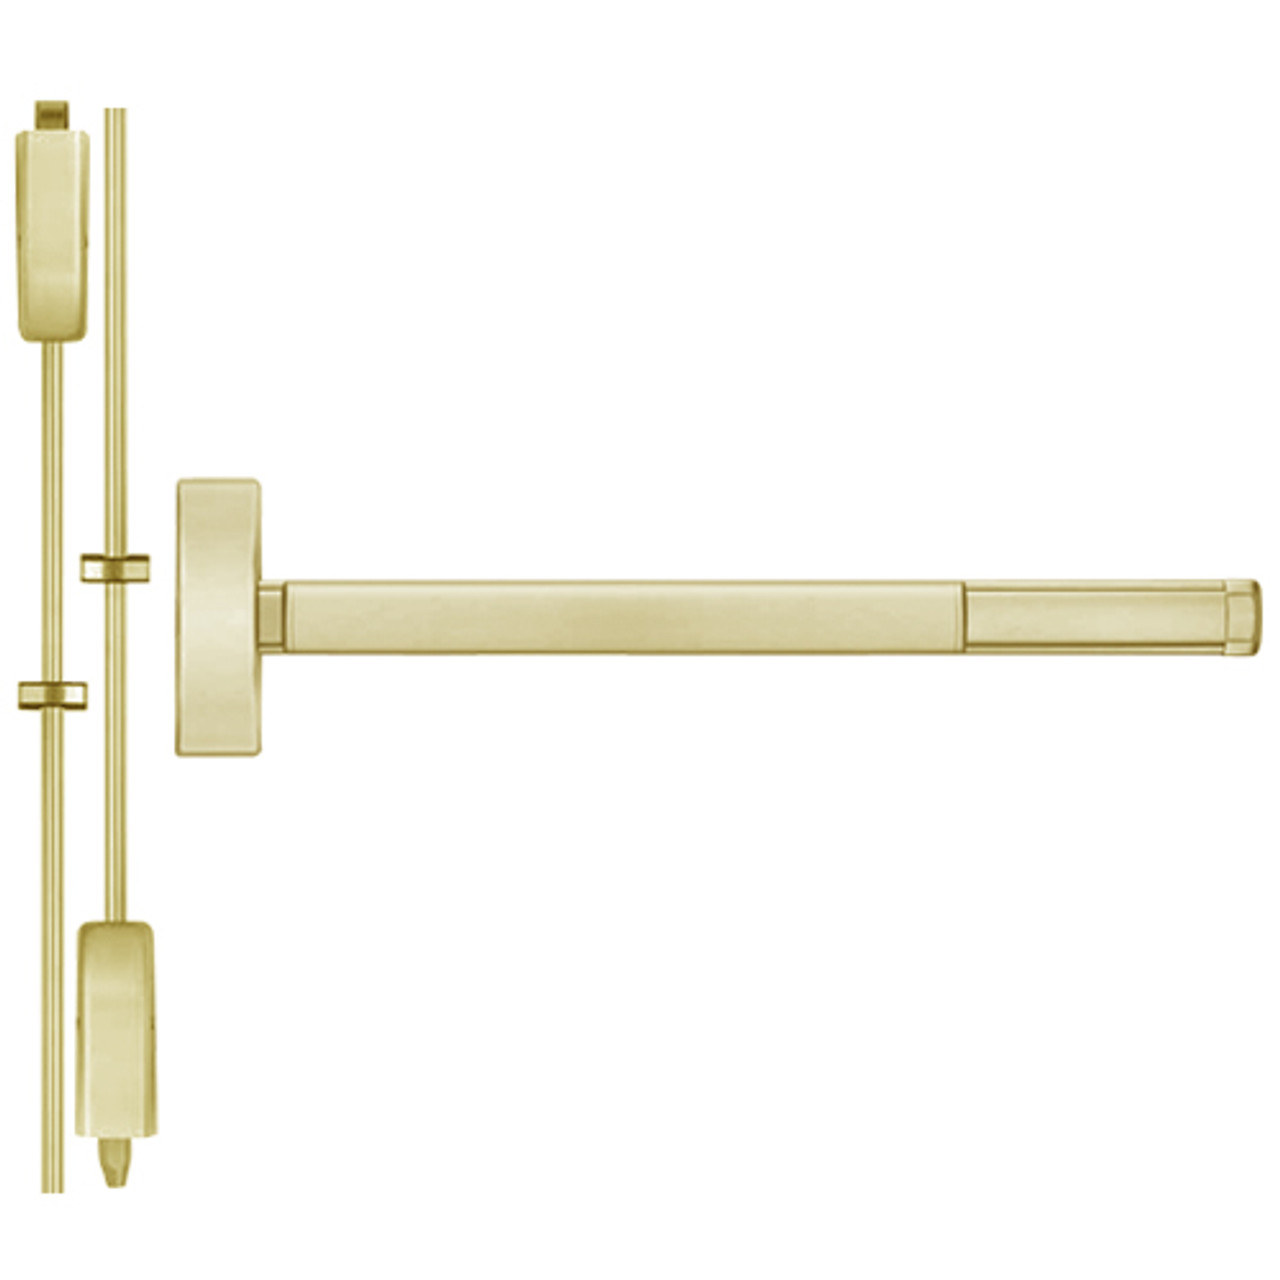 TSFL2203LBR-606-48 PHI 2200 Series Apex Surface Vertical Rod Device with Touchbar Monitoring Switch Prepped for Key Retracts Latchbolt in Satin Brass Finish